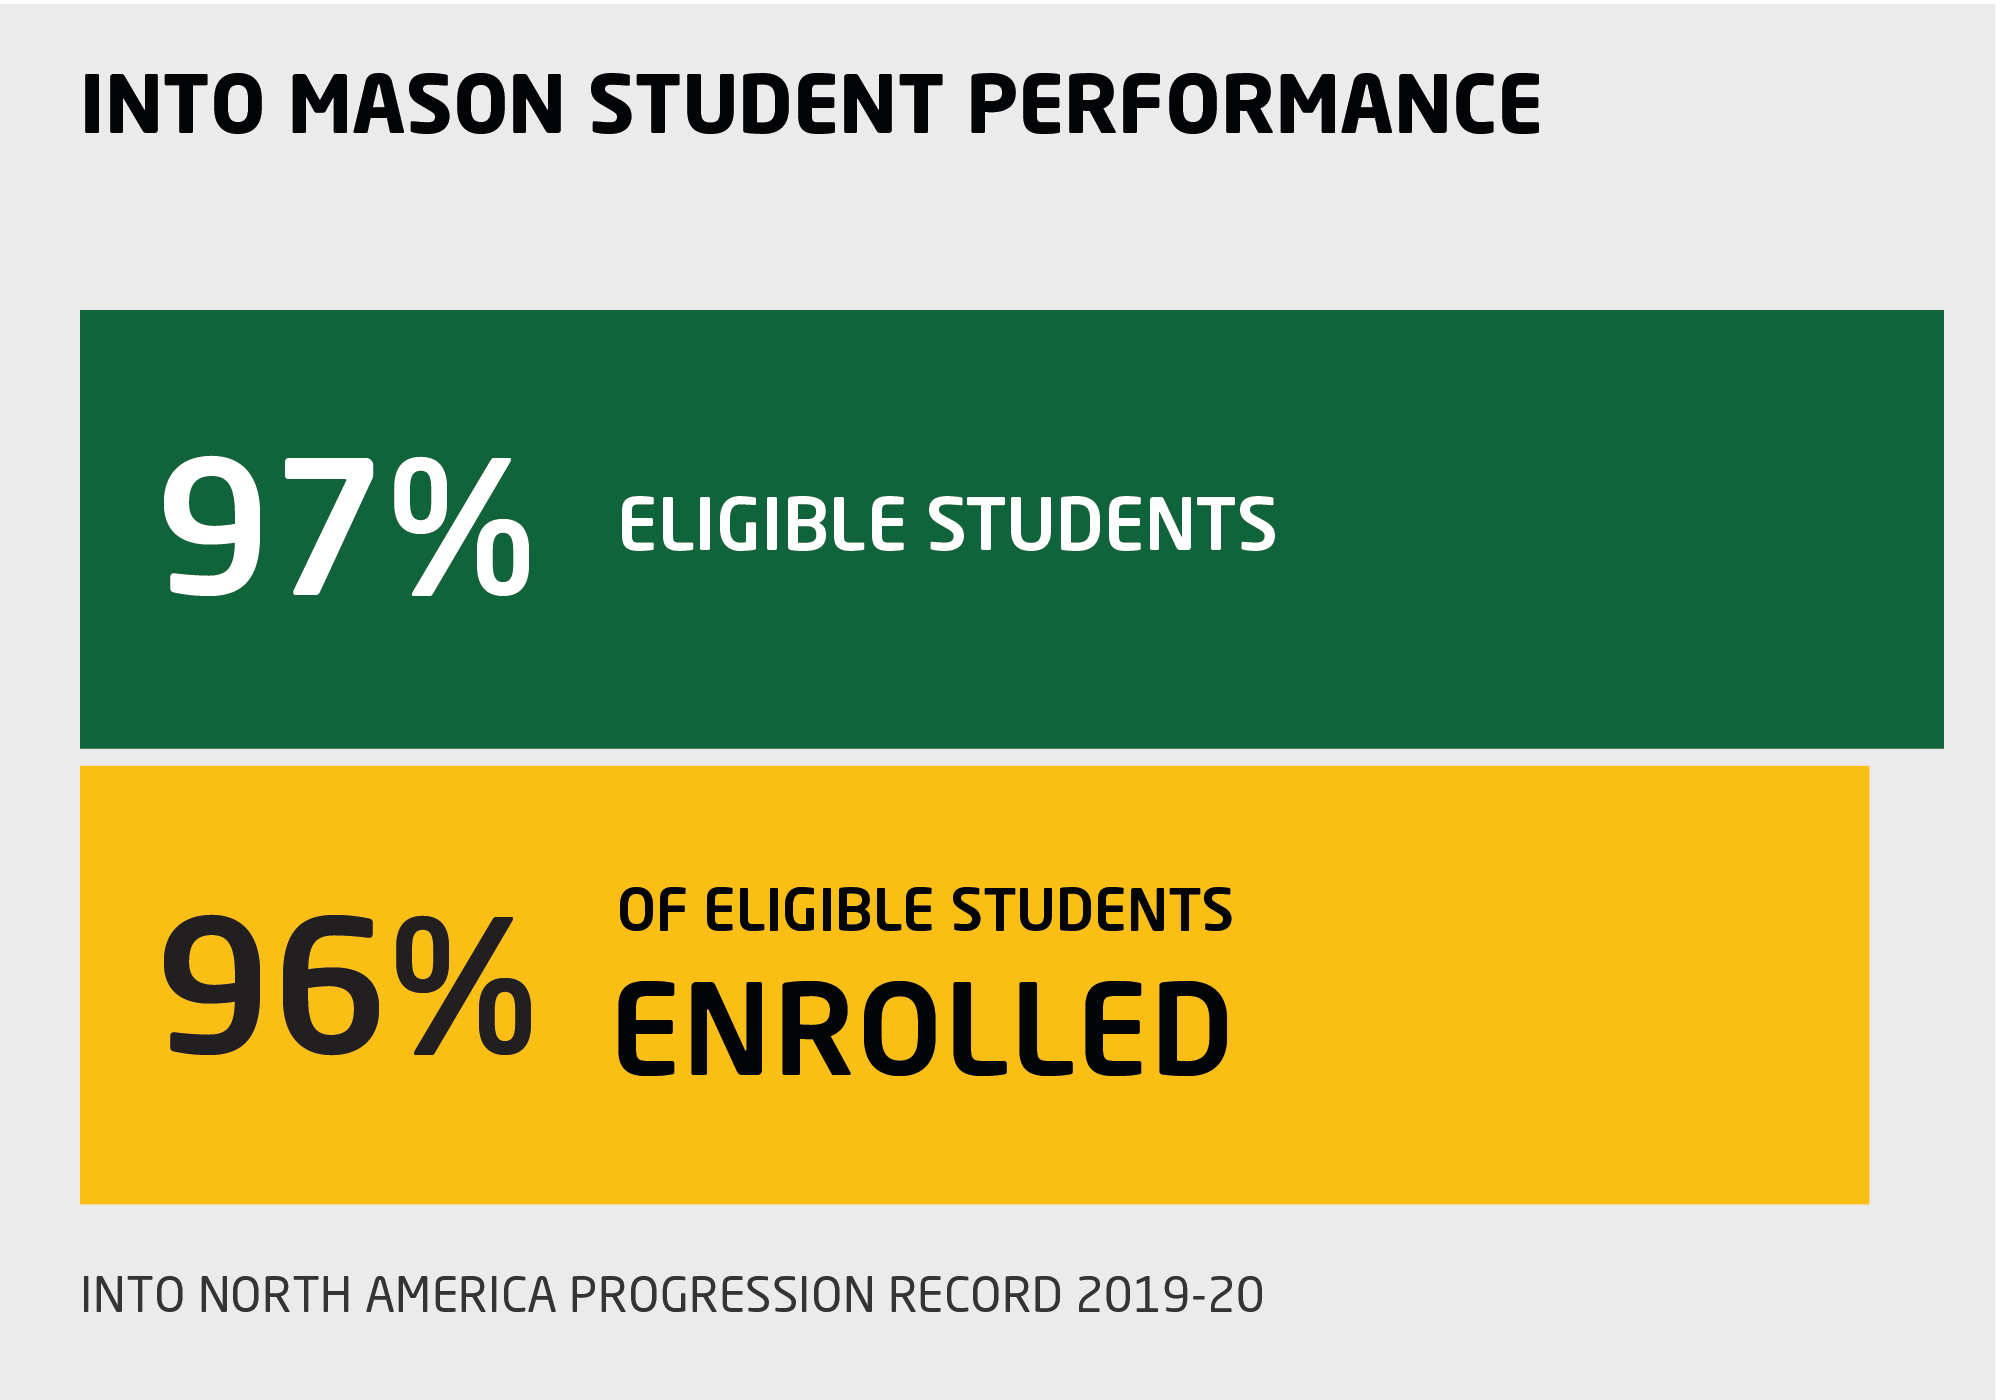 Infographic showing INTO George Mason University student performance, with 97% of students eligible to progress to Mason degree programs after Pathway, and 96% of those eligible enrolling.